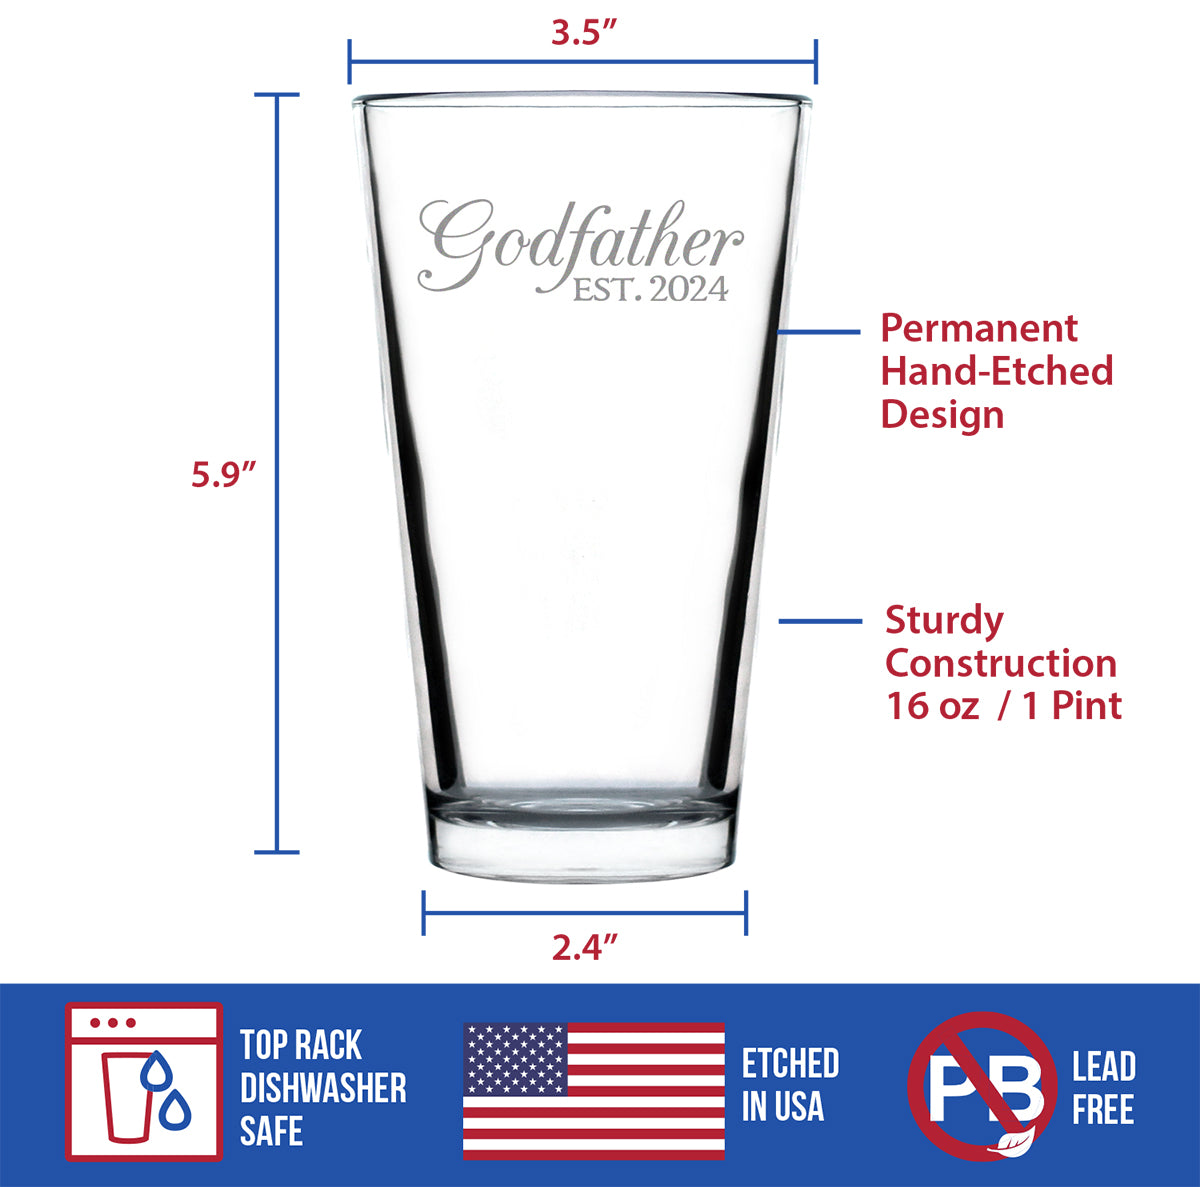 Godfather Est 2024 - New Godfather Pint Glass Proposal Gift for First Time Godparents - Decorative 16 Oz Glasses